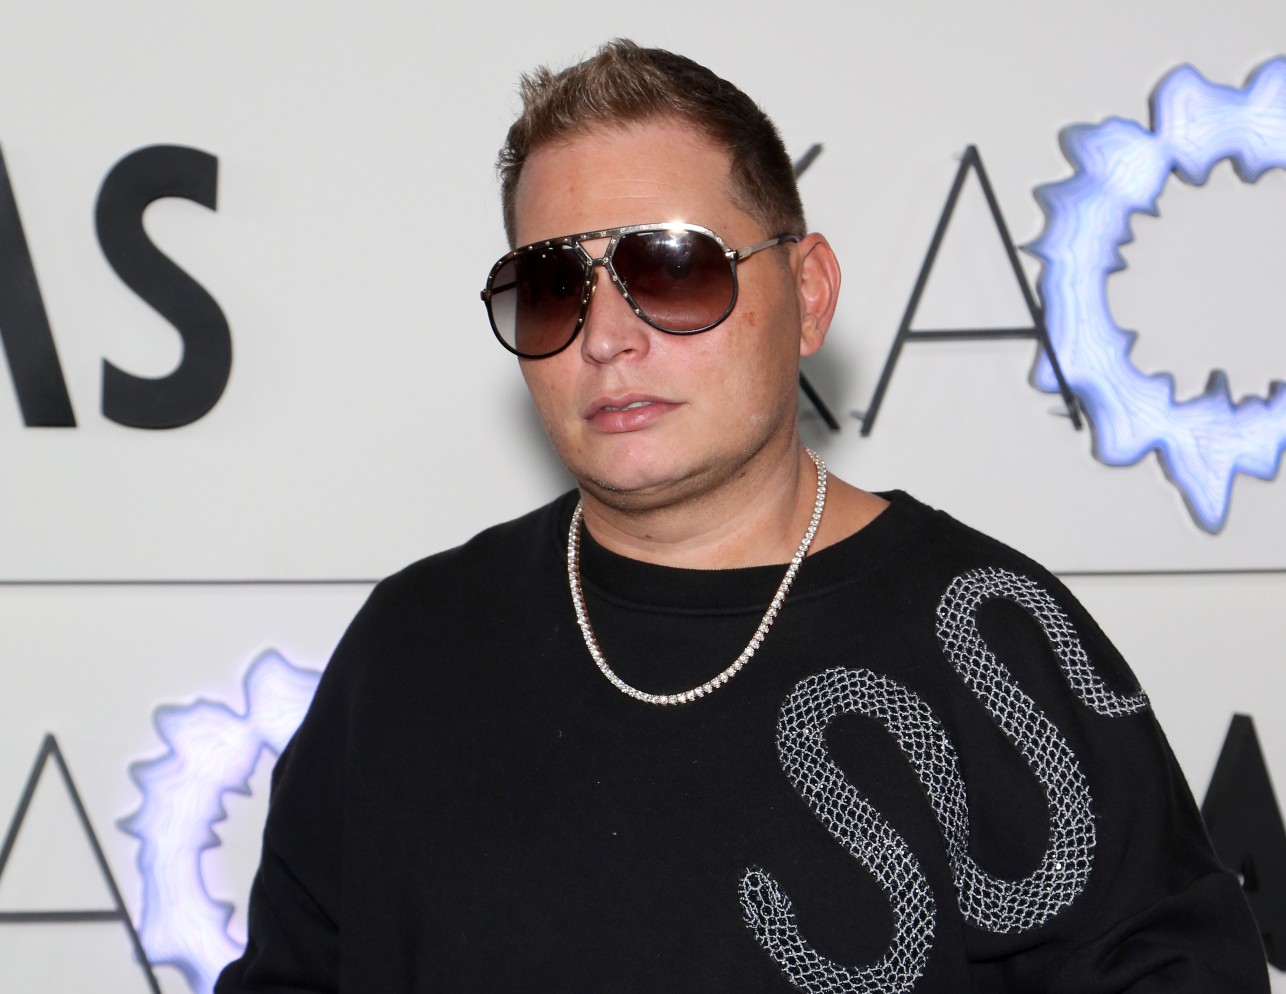 Scott Storch Is Unmatched: Best Hits With Beyoncé, Dr. Dre & More